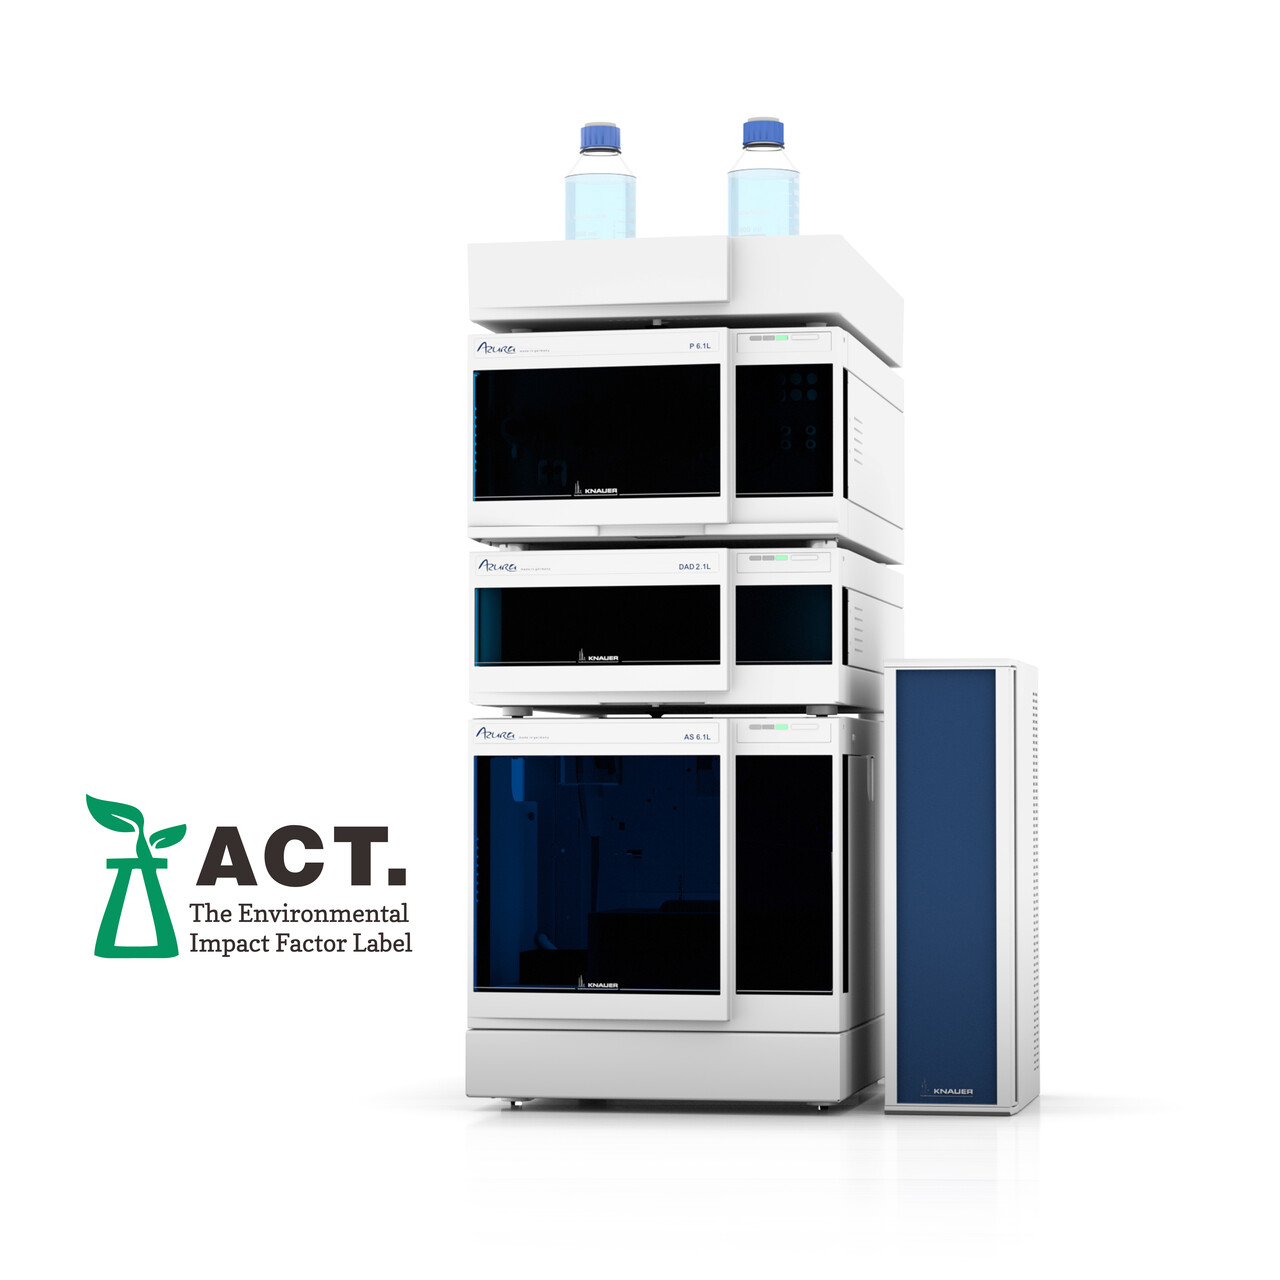 ACT certified KNAUER AZURA 862 bar HPLC system with diode array detection